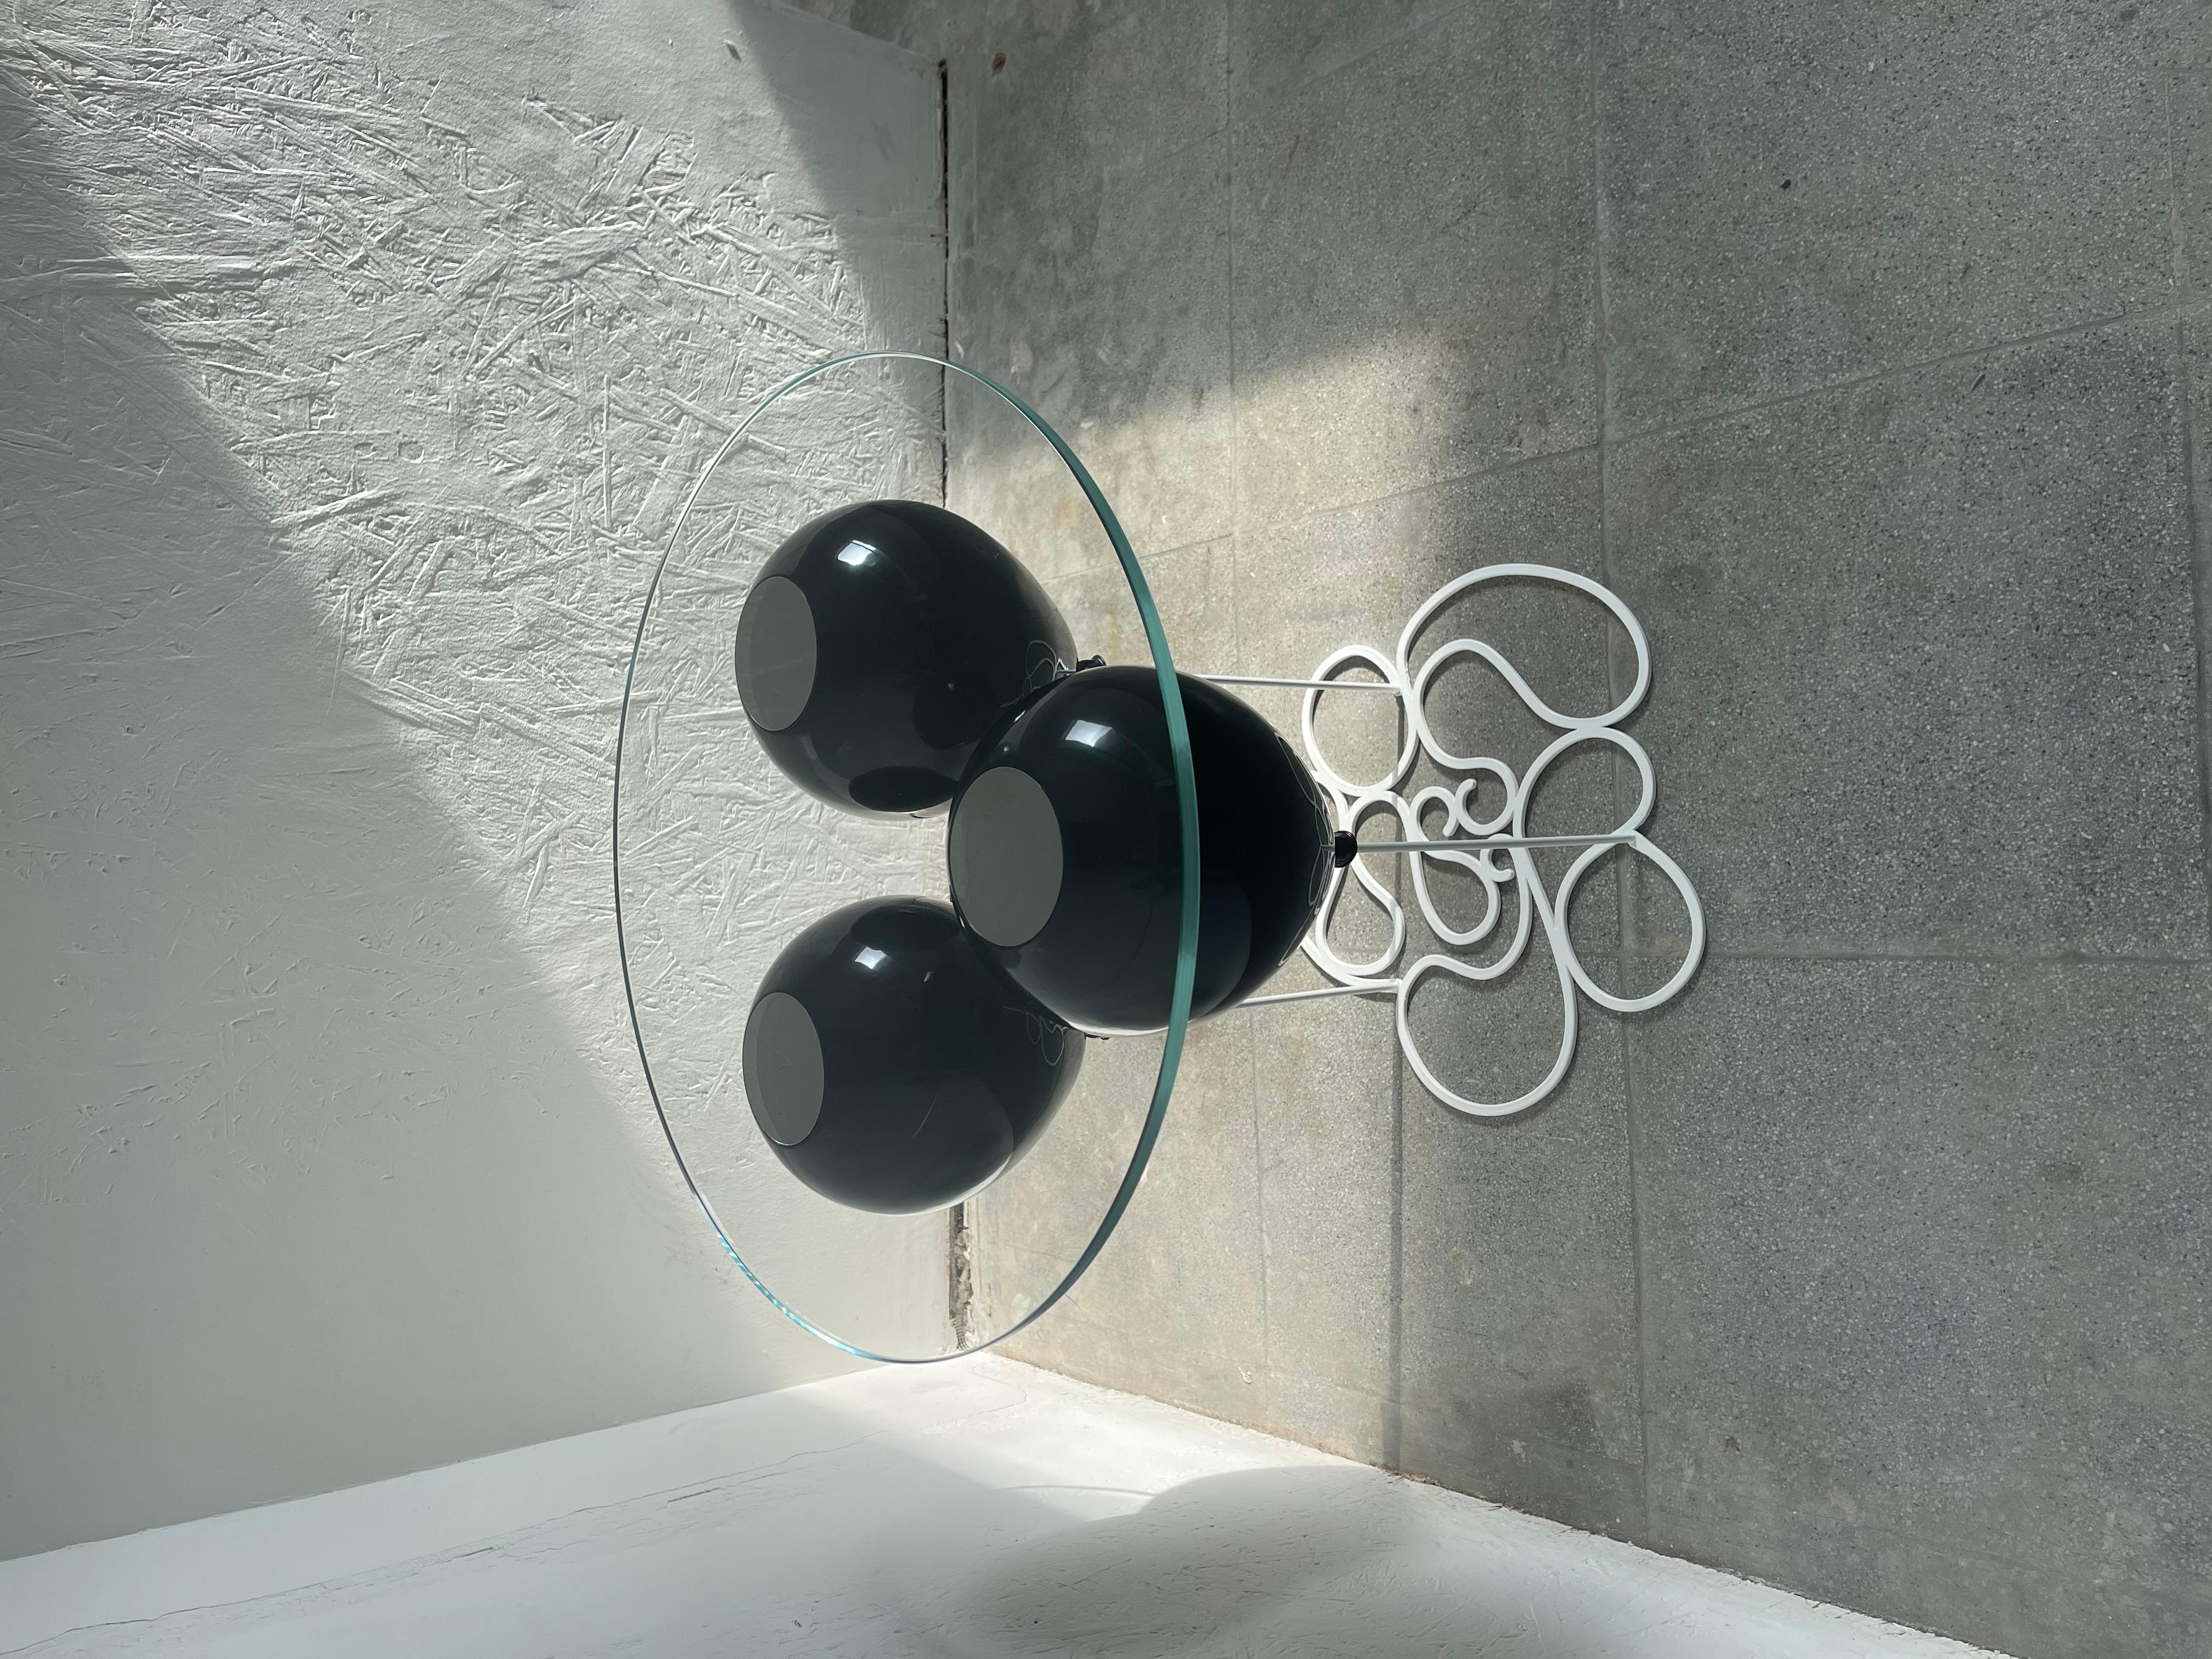 A modern side table with a much darker side from acclaimed British furniture designer Duffy London.

The UP! Balloon Side Table is a playful trompe l’oeil furniture piece.  A trio of metallic, black balloons impresses the illusion of a levitating